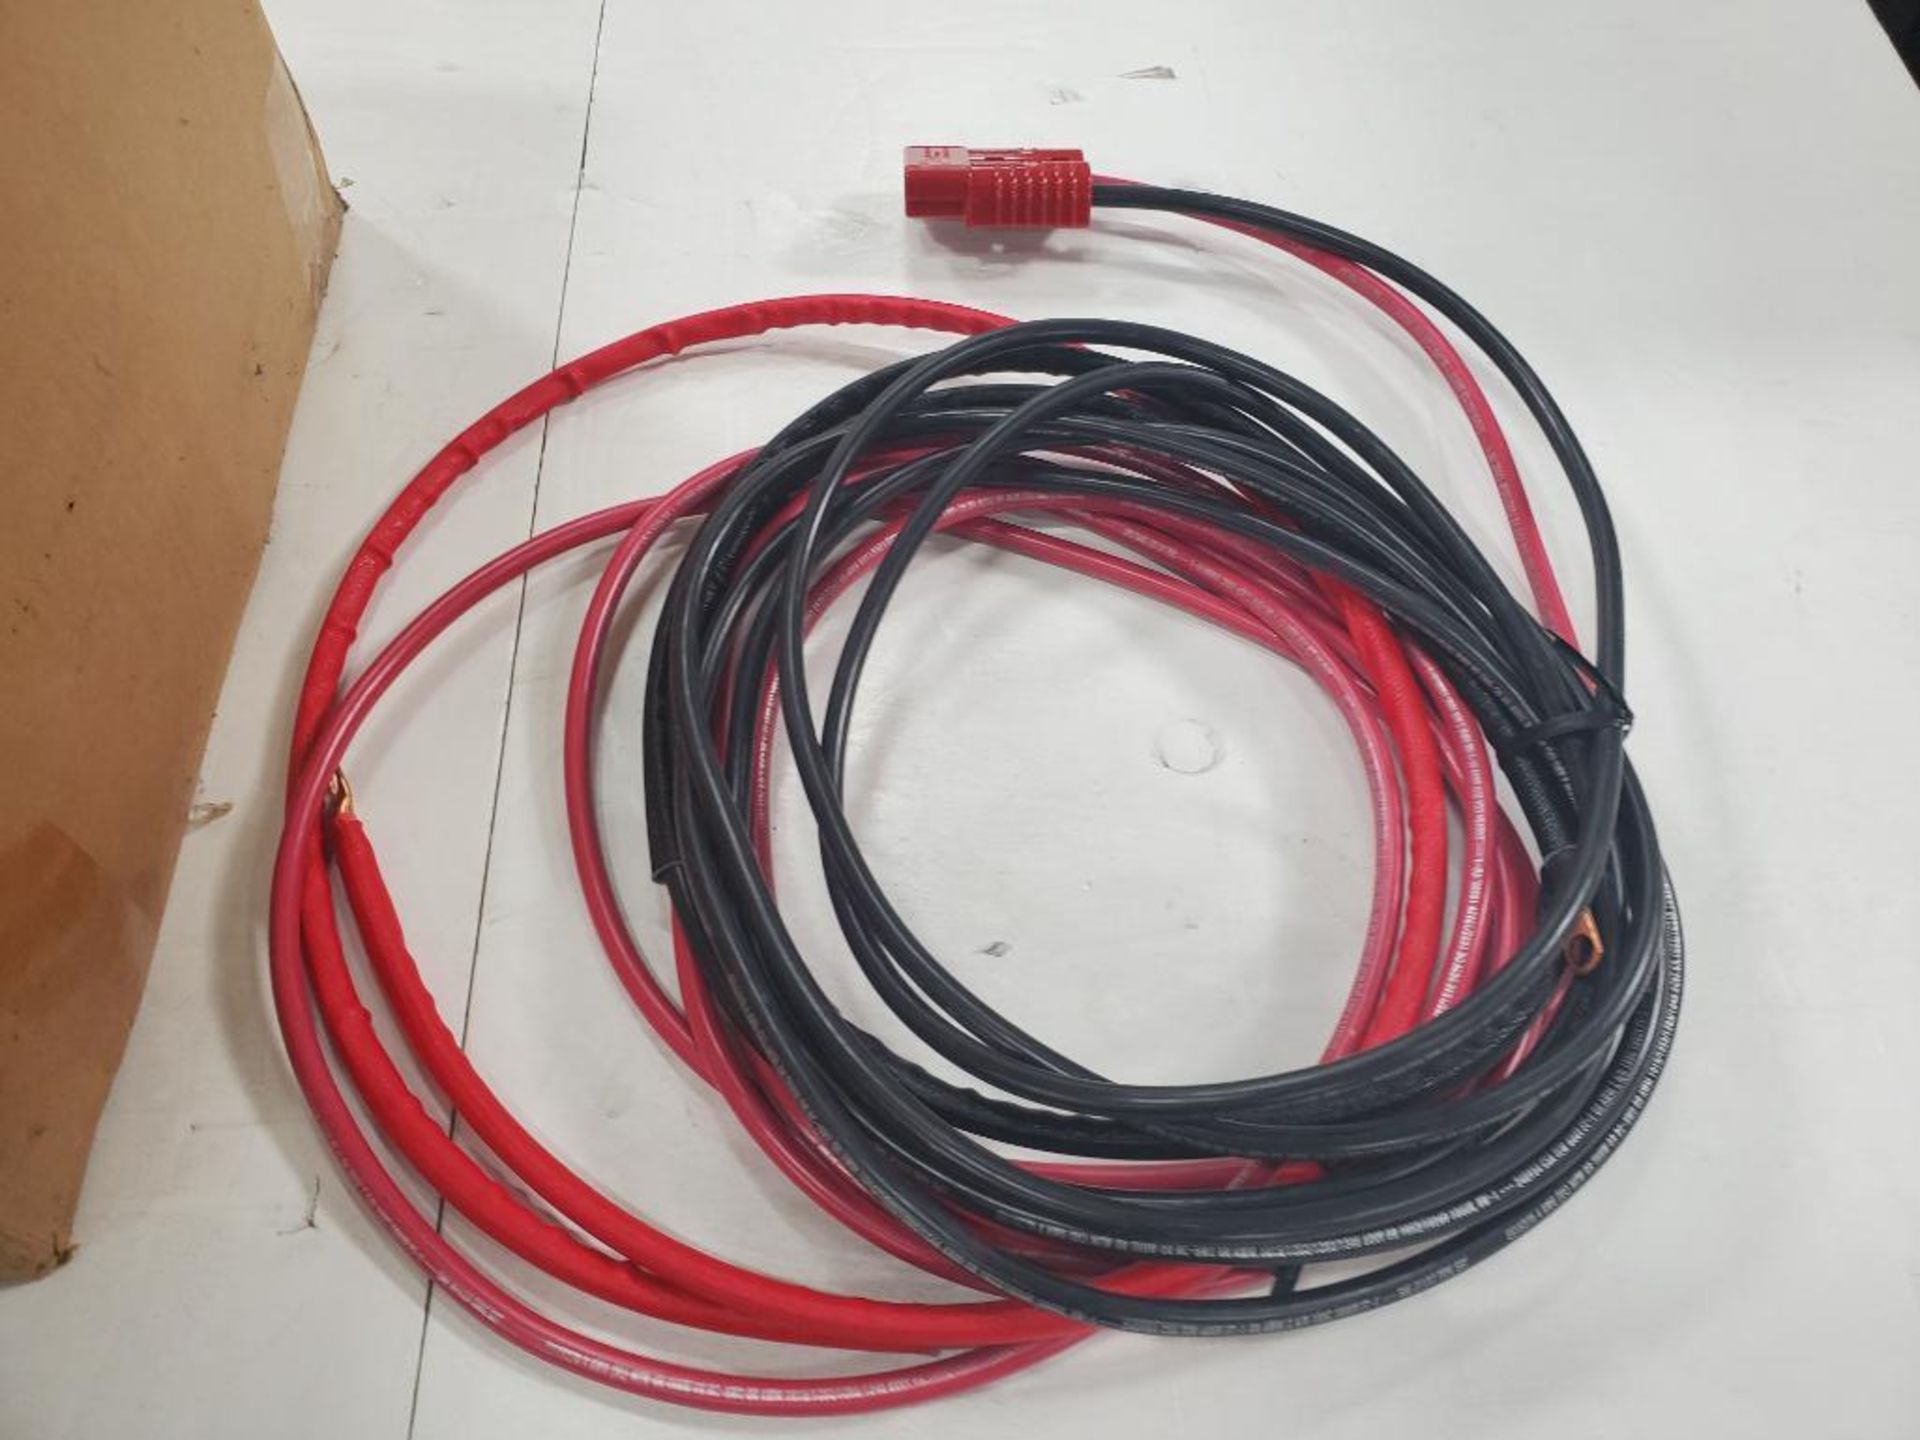 Qty 15 - Anderson 23ft battery adapter cable. RBARA23FT4-G1. 175A, 600V plug. New in box.